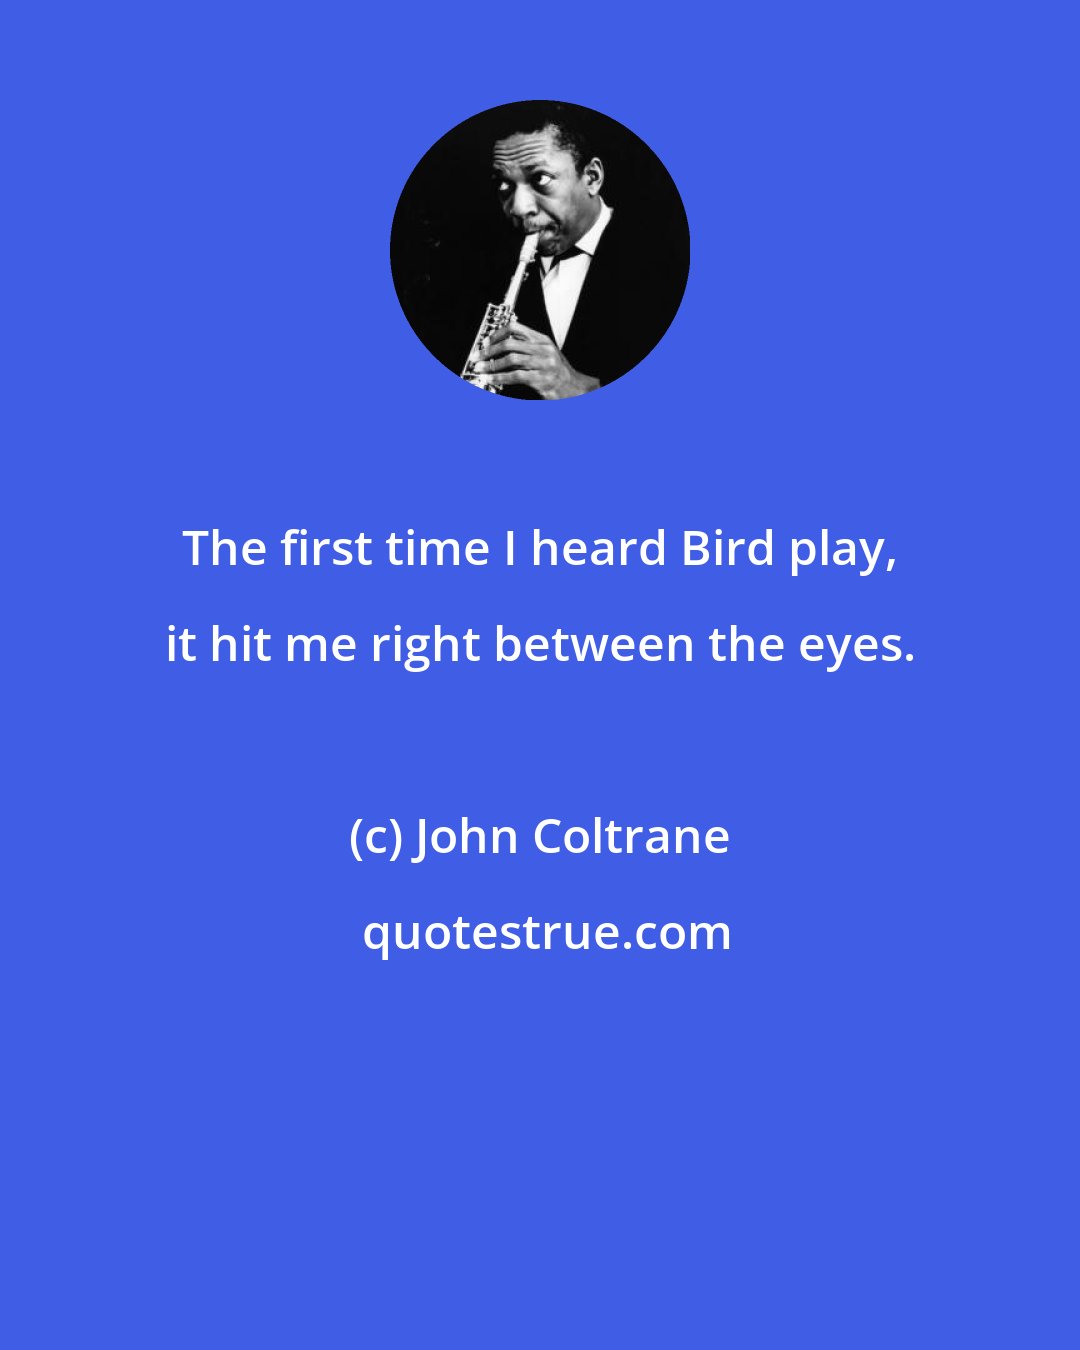 John Coltrane: The first time I heard Bird play, it hit me right between the eyes.